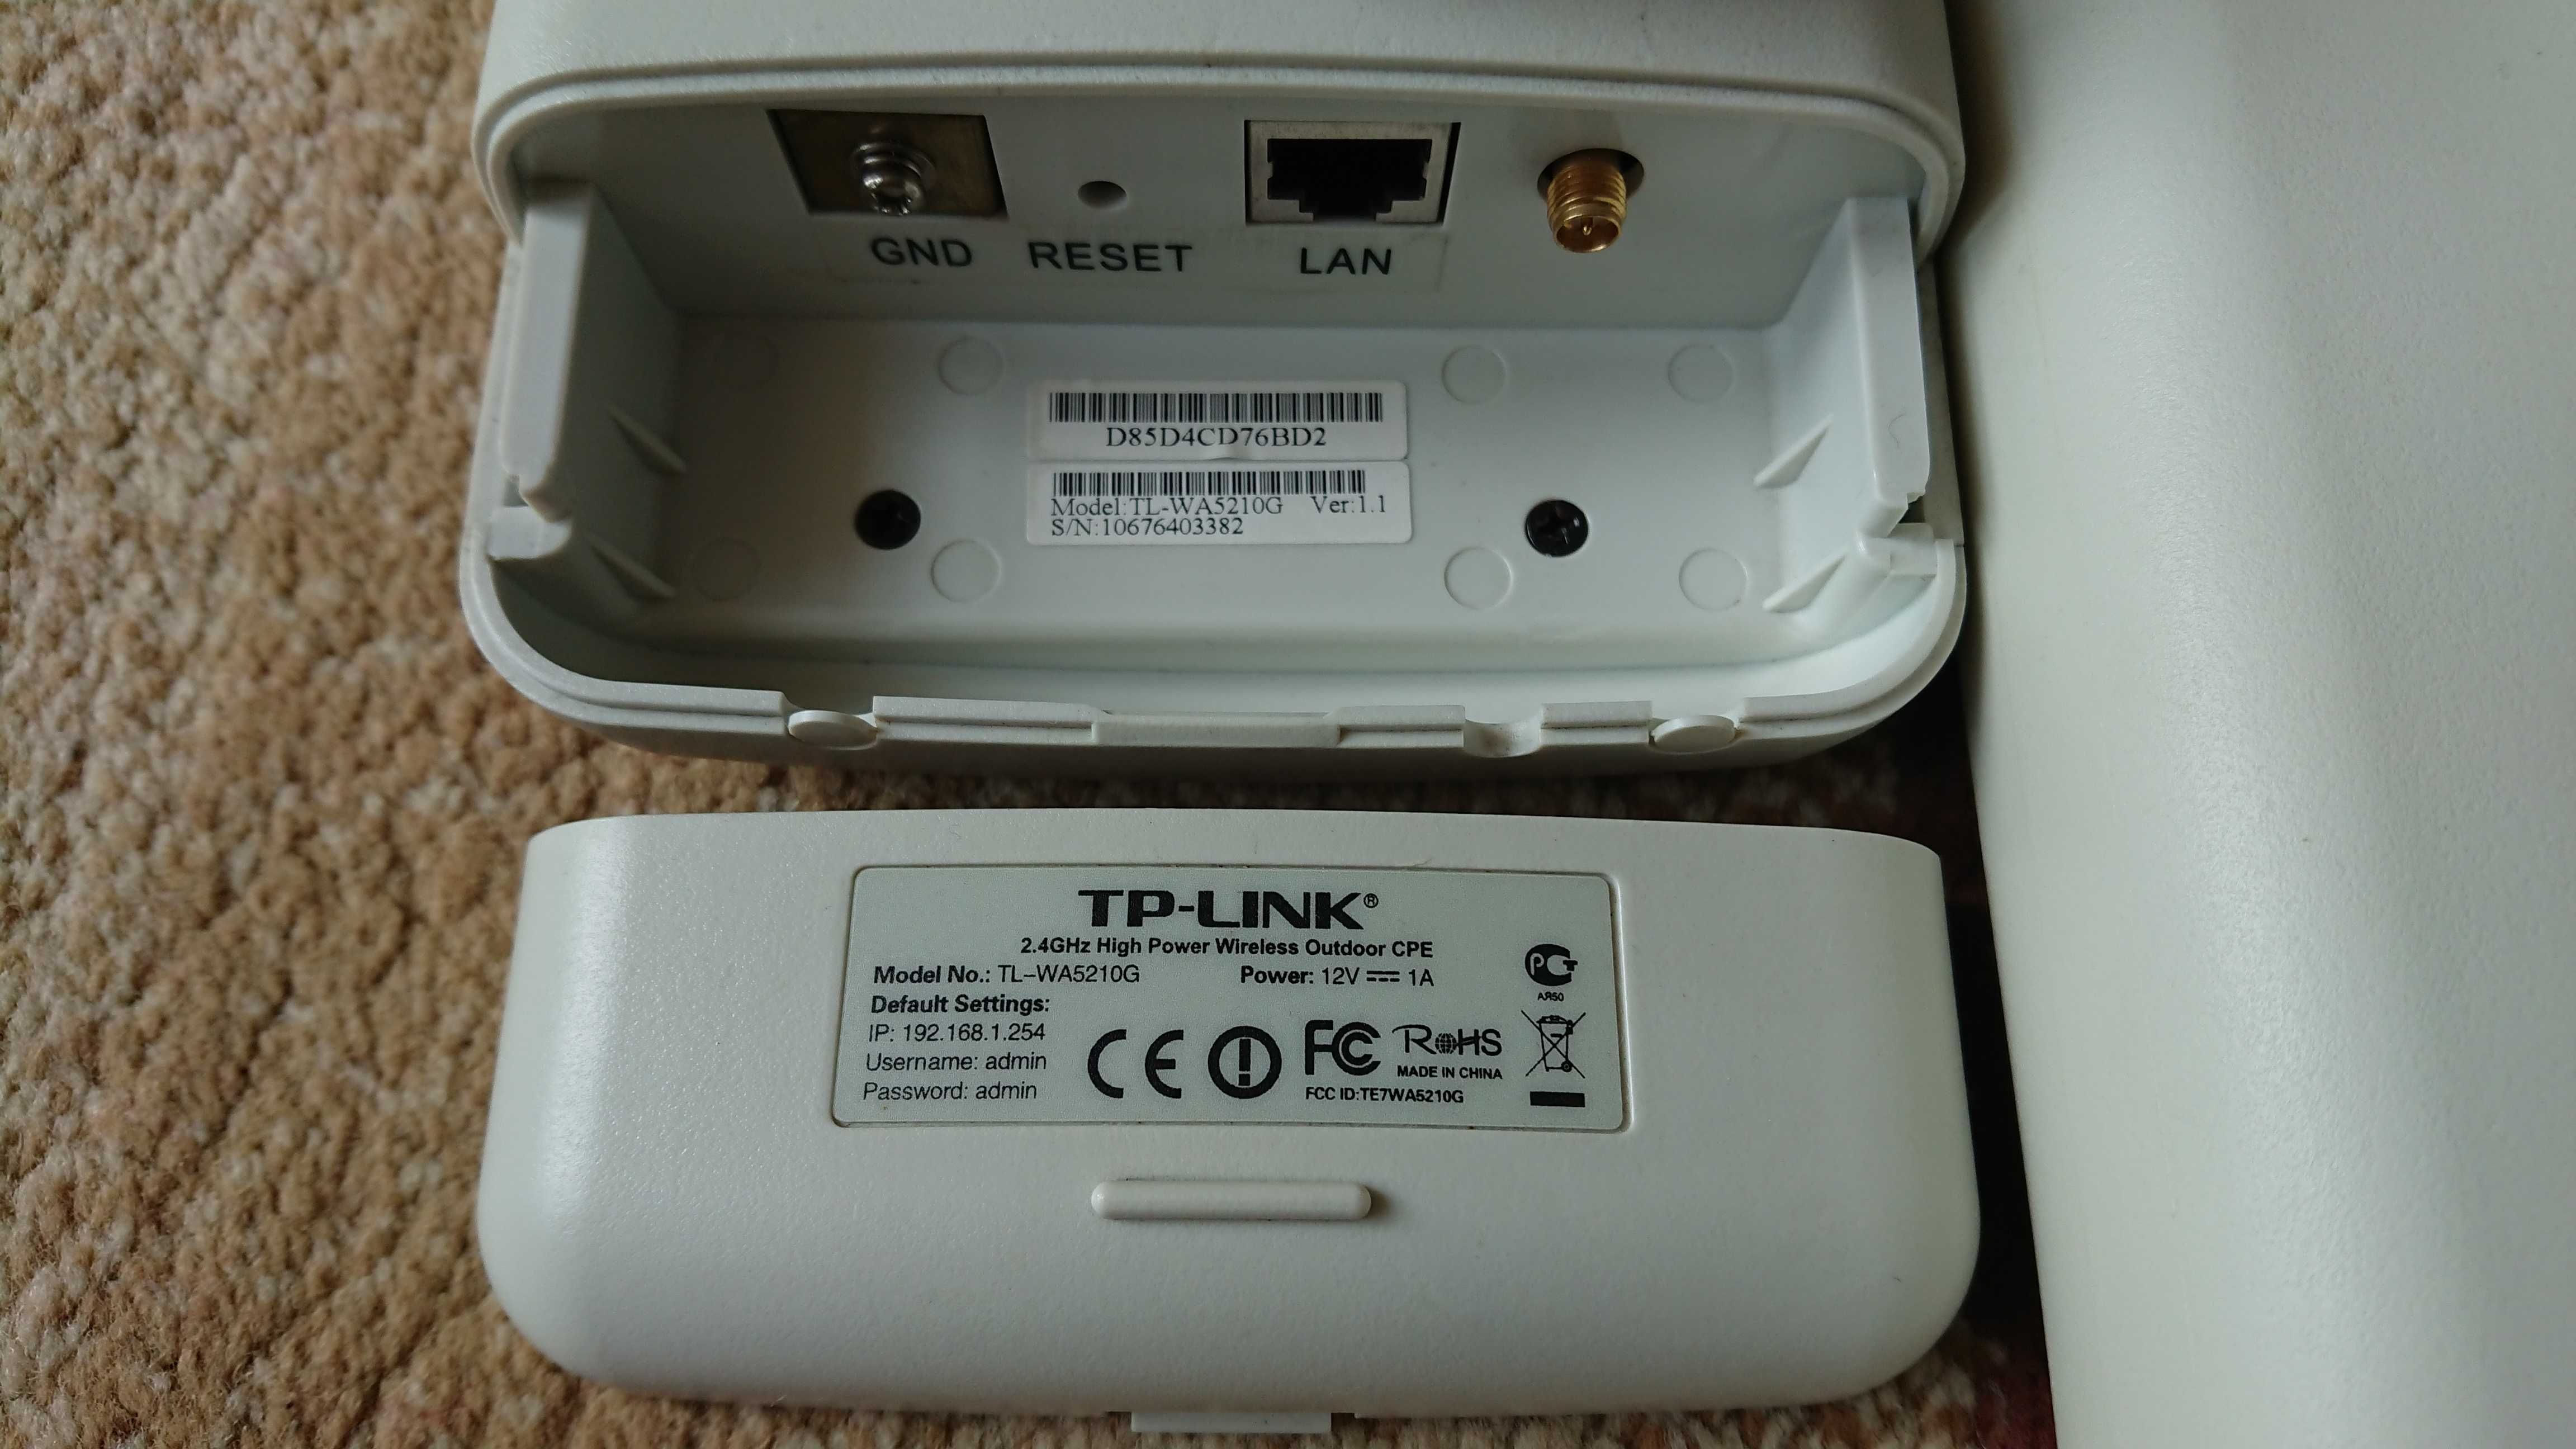 TP-Link TL-WA5210G 12dbi 2,4GHz 54Mb/s Outdoor